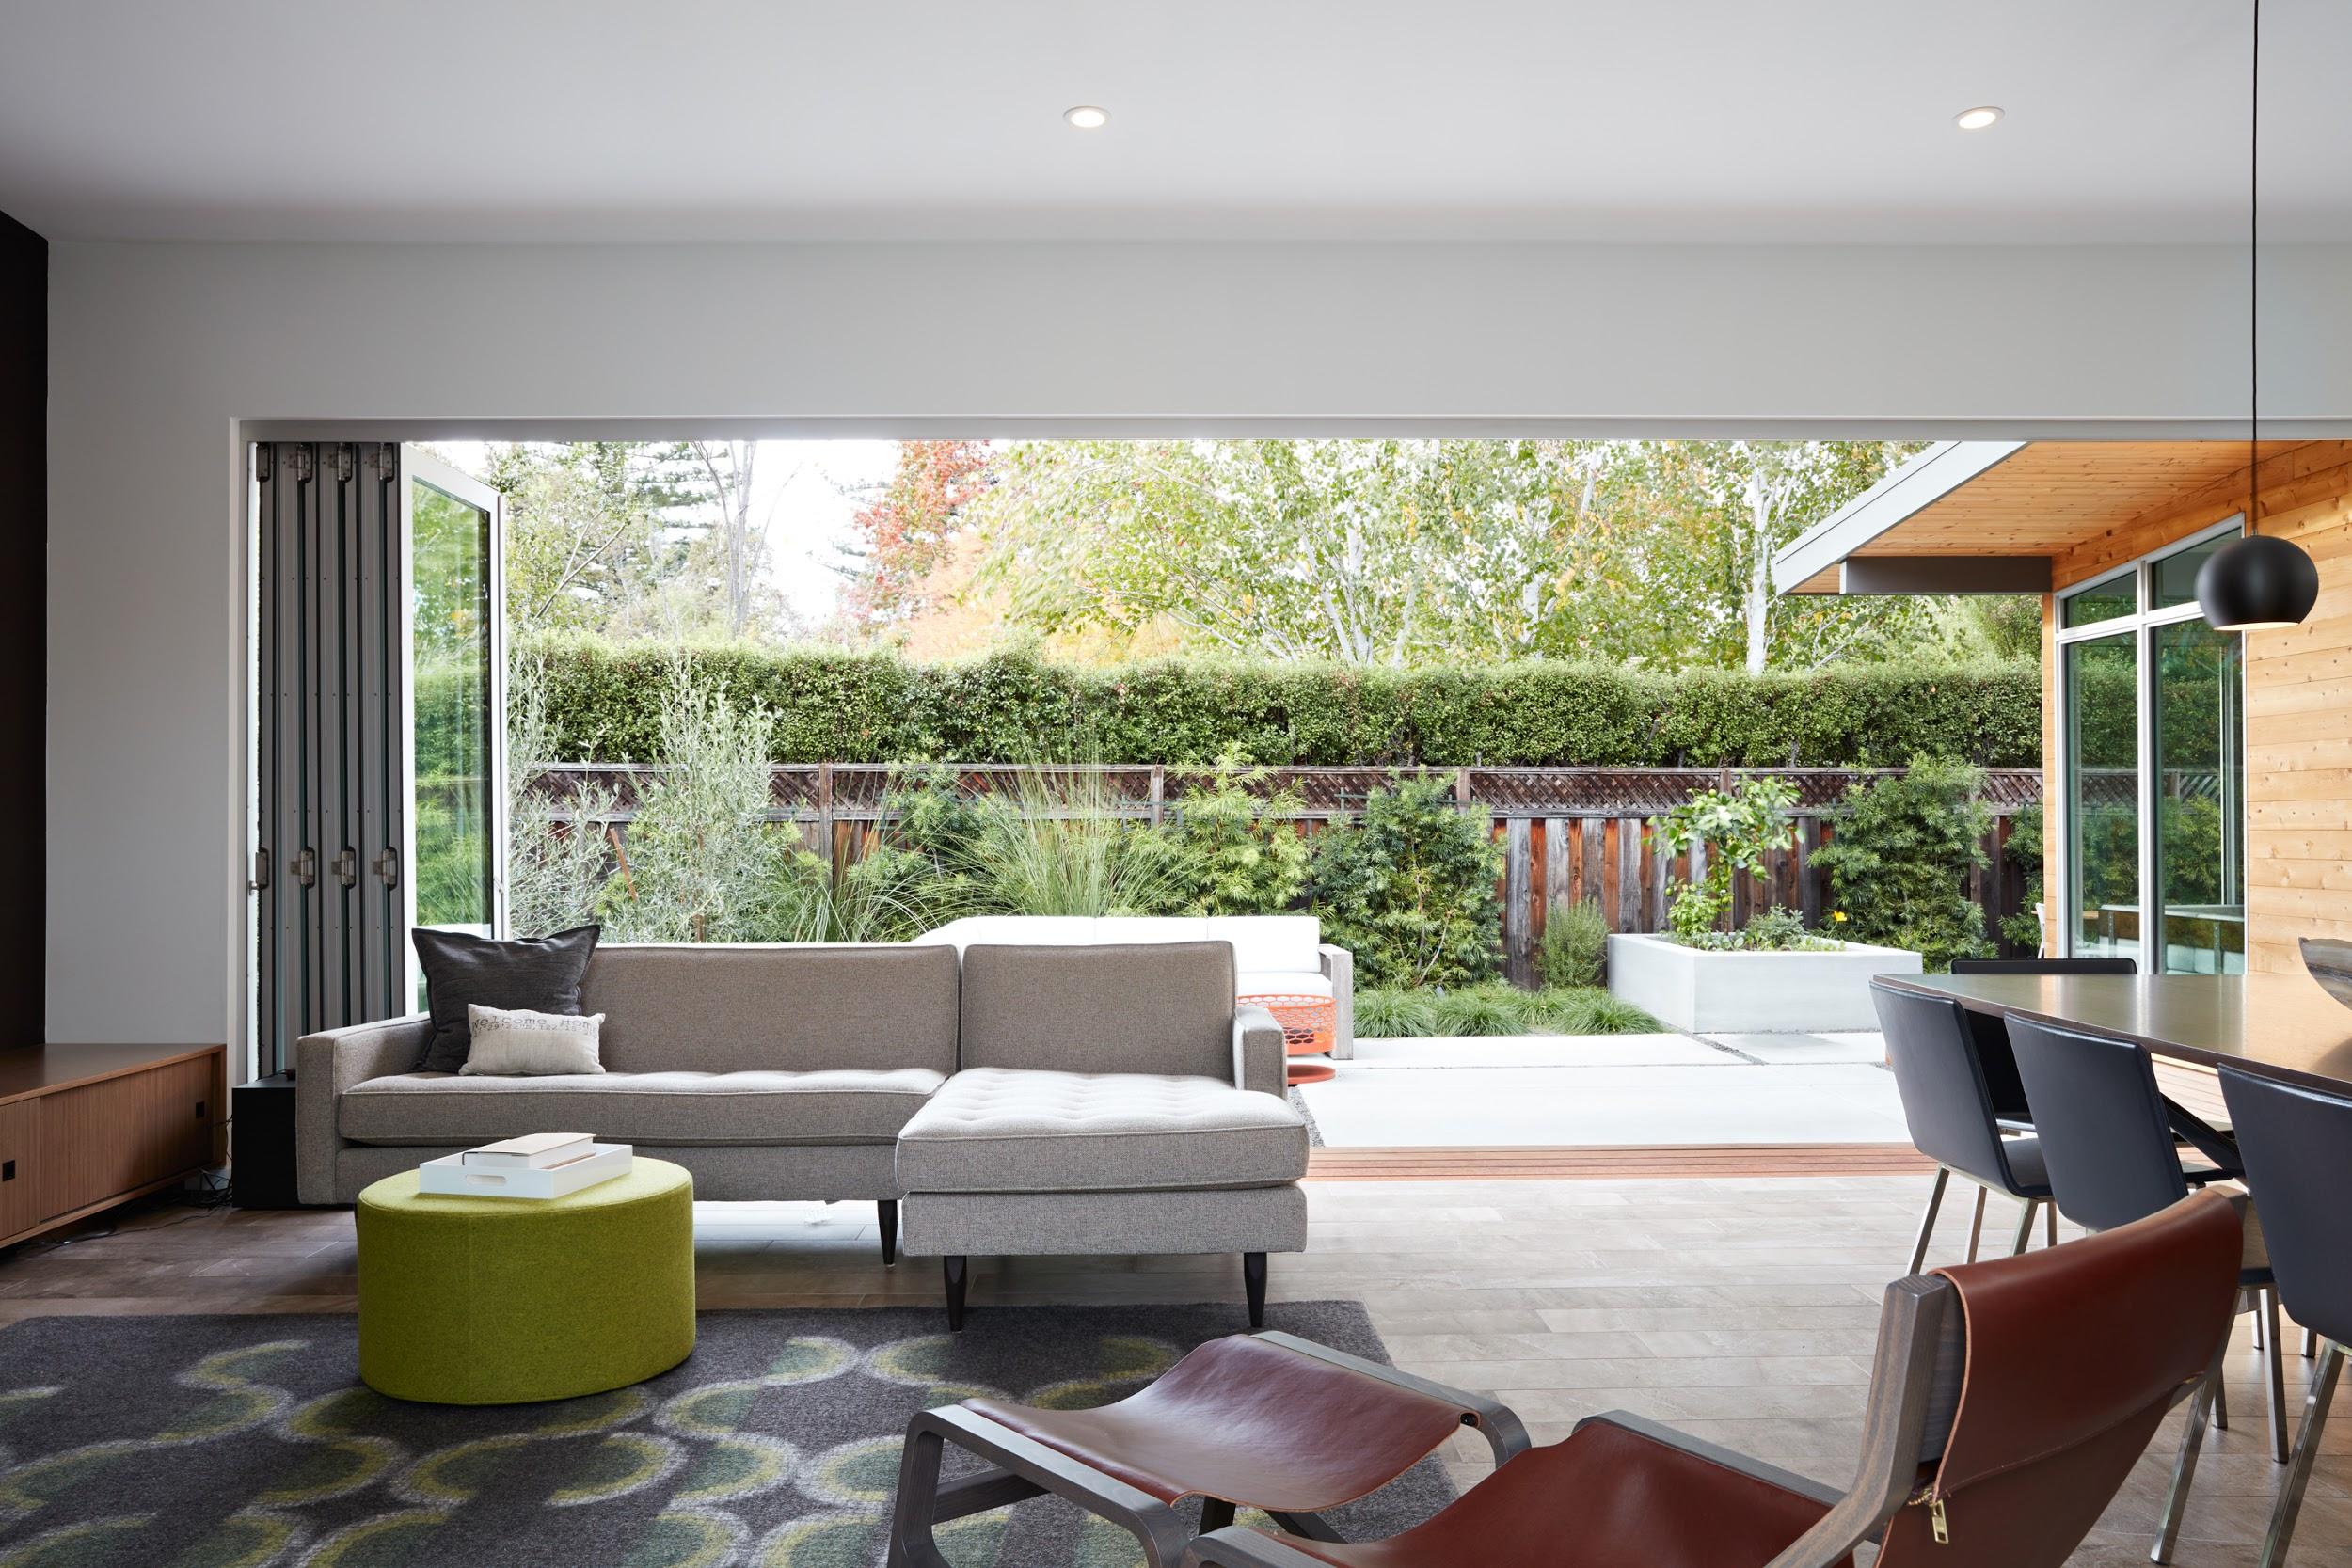 The Series 7950 Aluminum Bi-Fold Door from Western Windows opening onto a living room